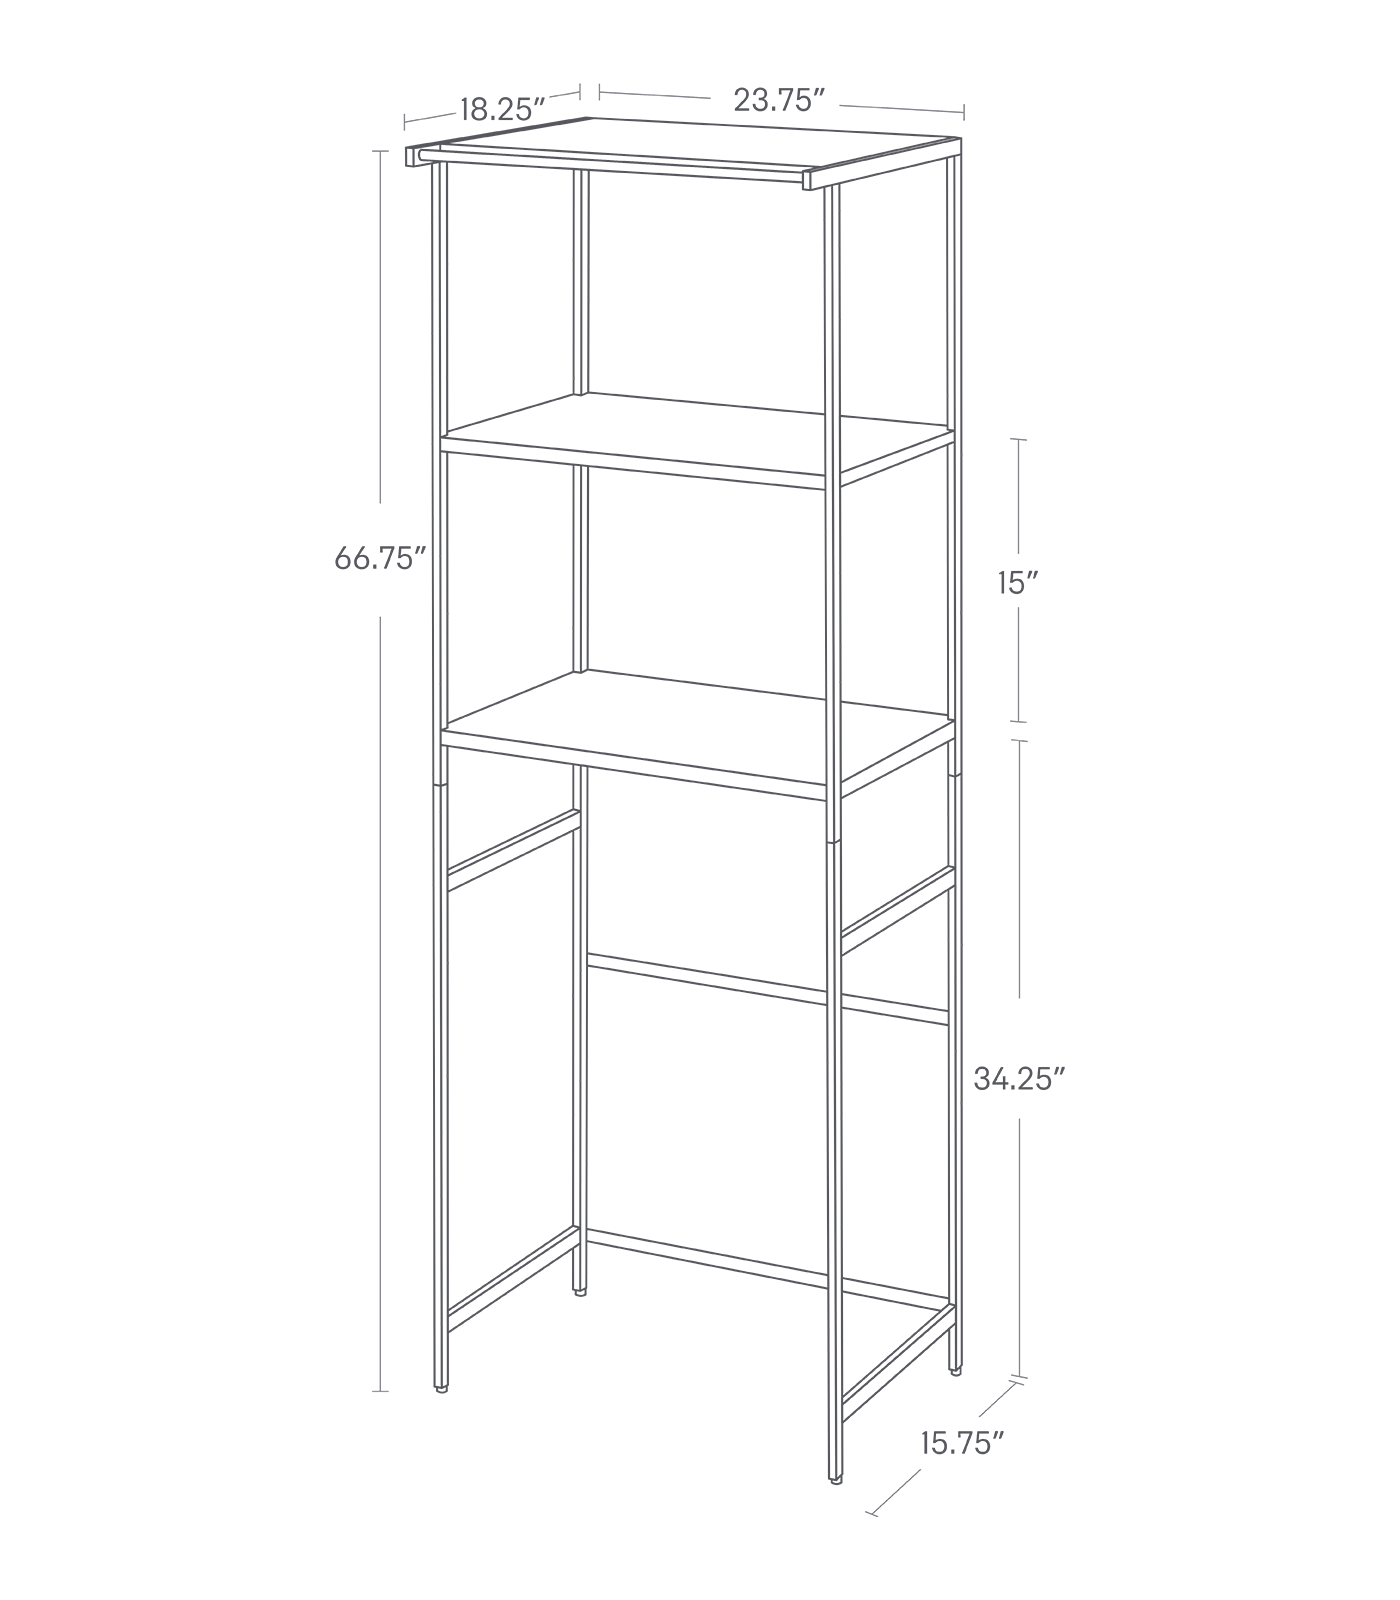 Dimension Image for Storage Rack on a white background showing height of 66.75